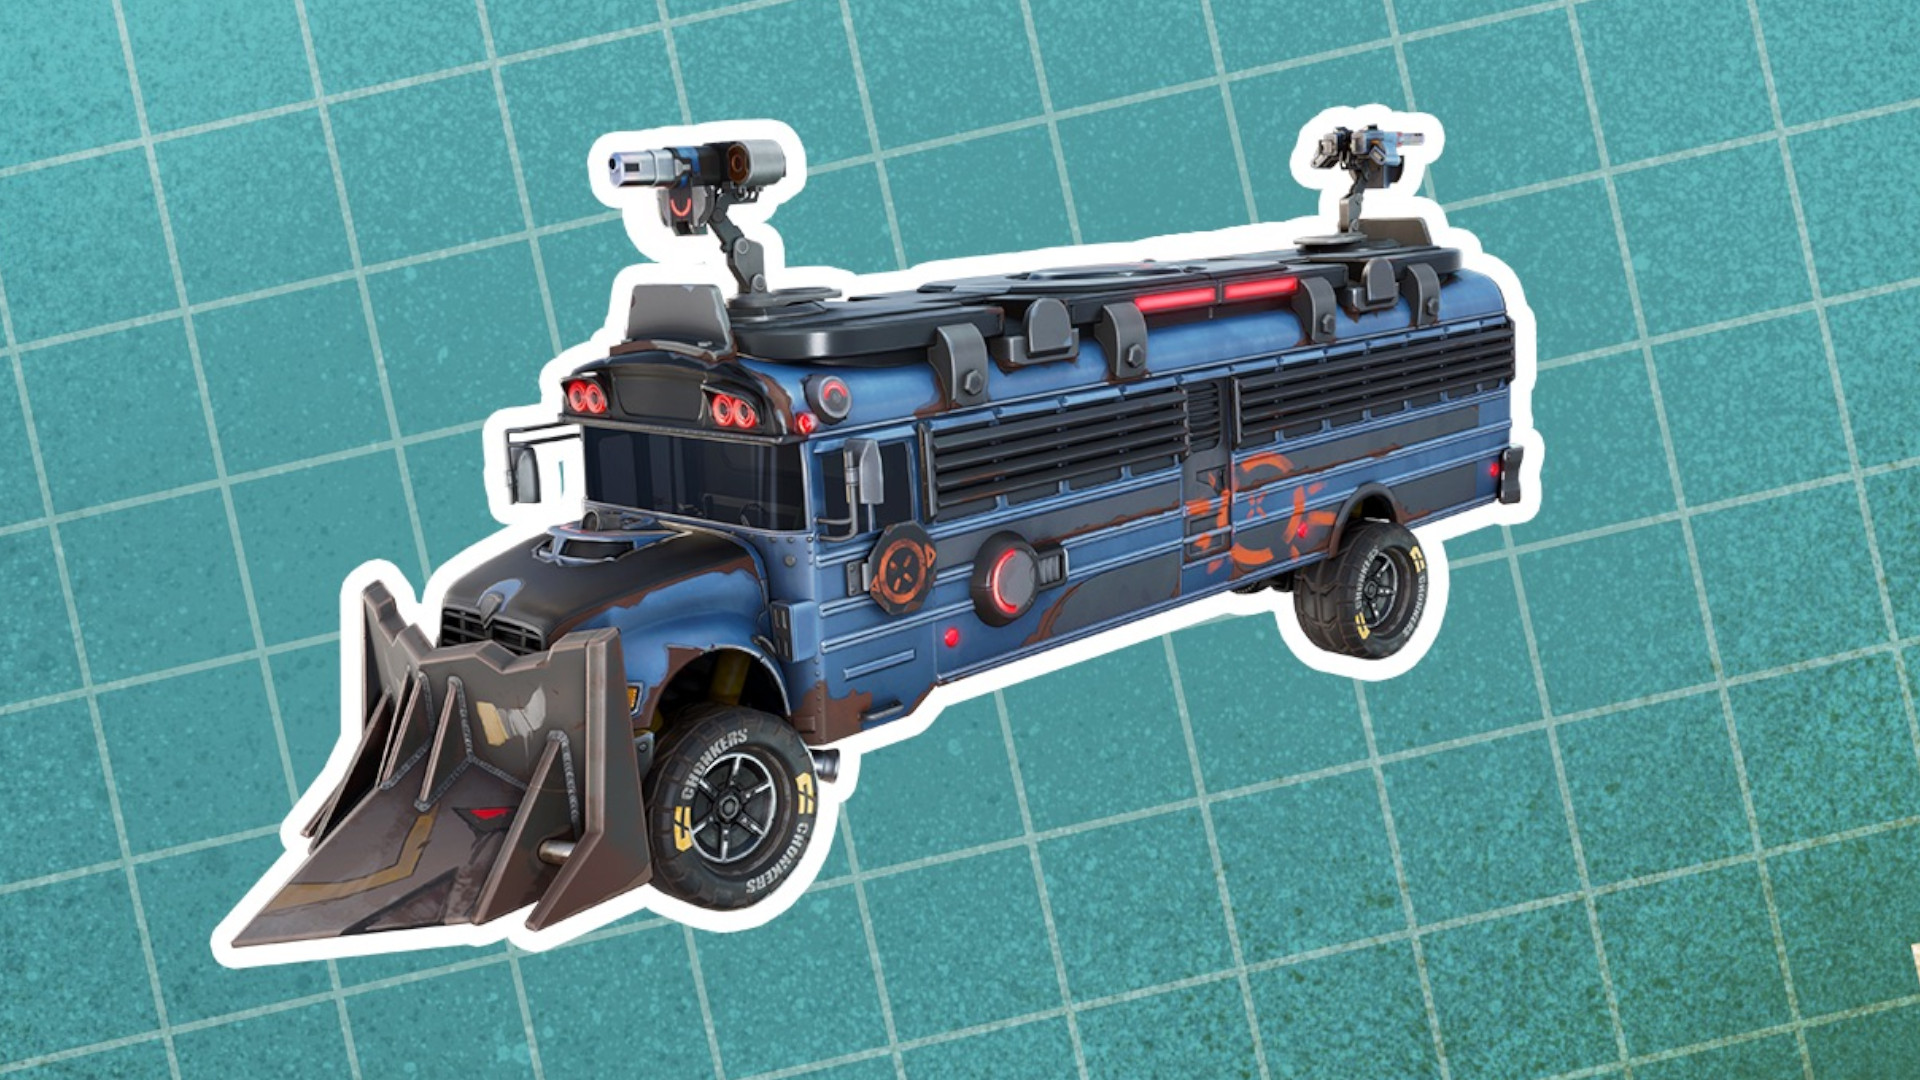 You can finally drive the Fortnite battle bus